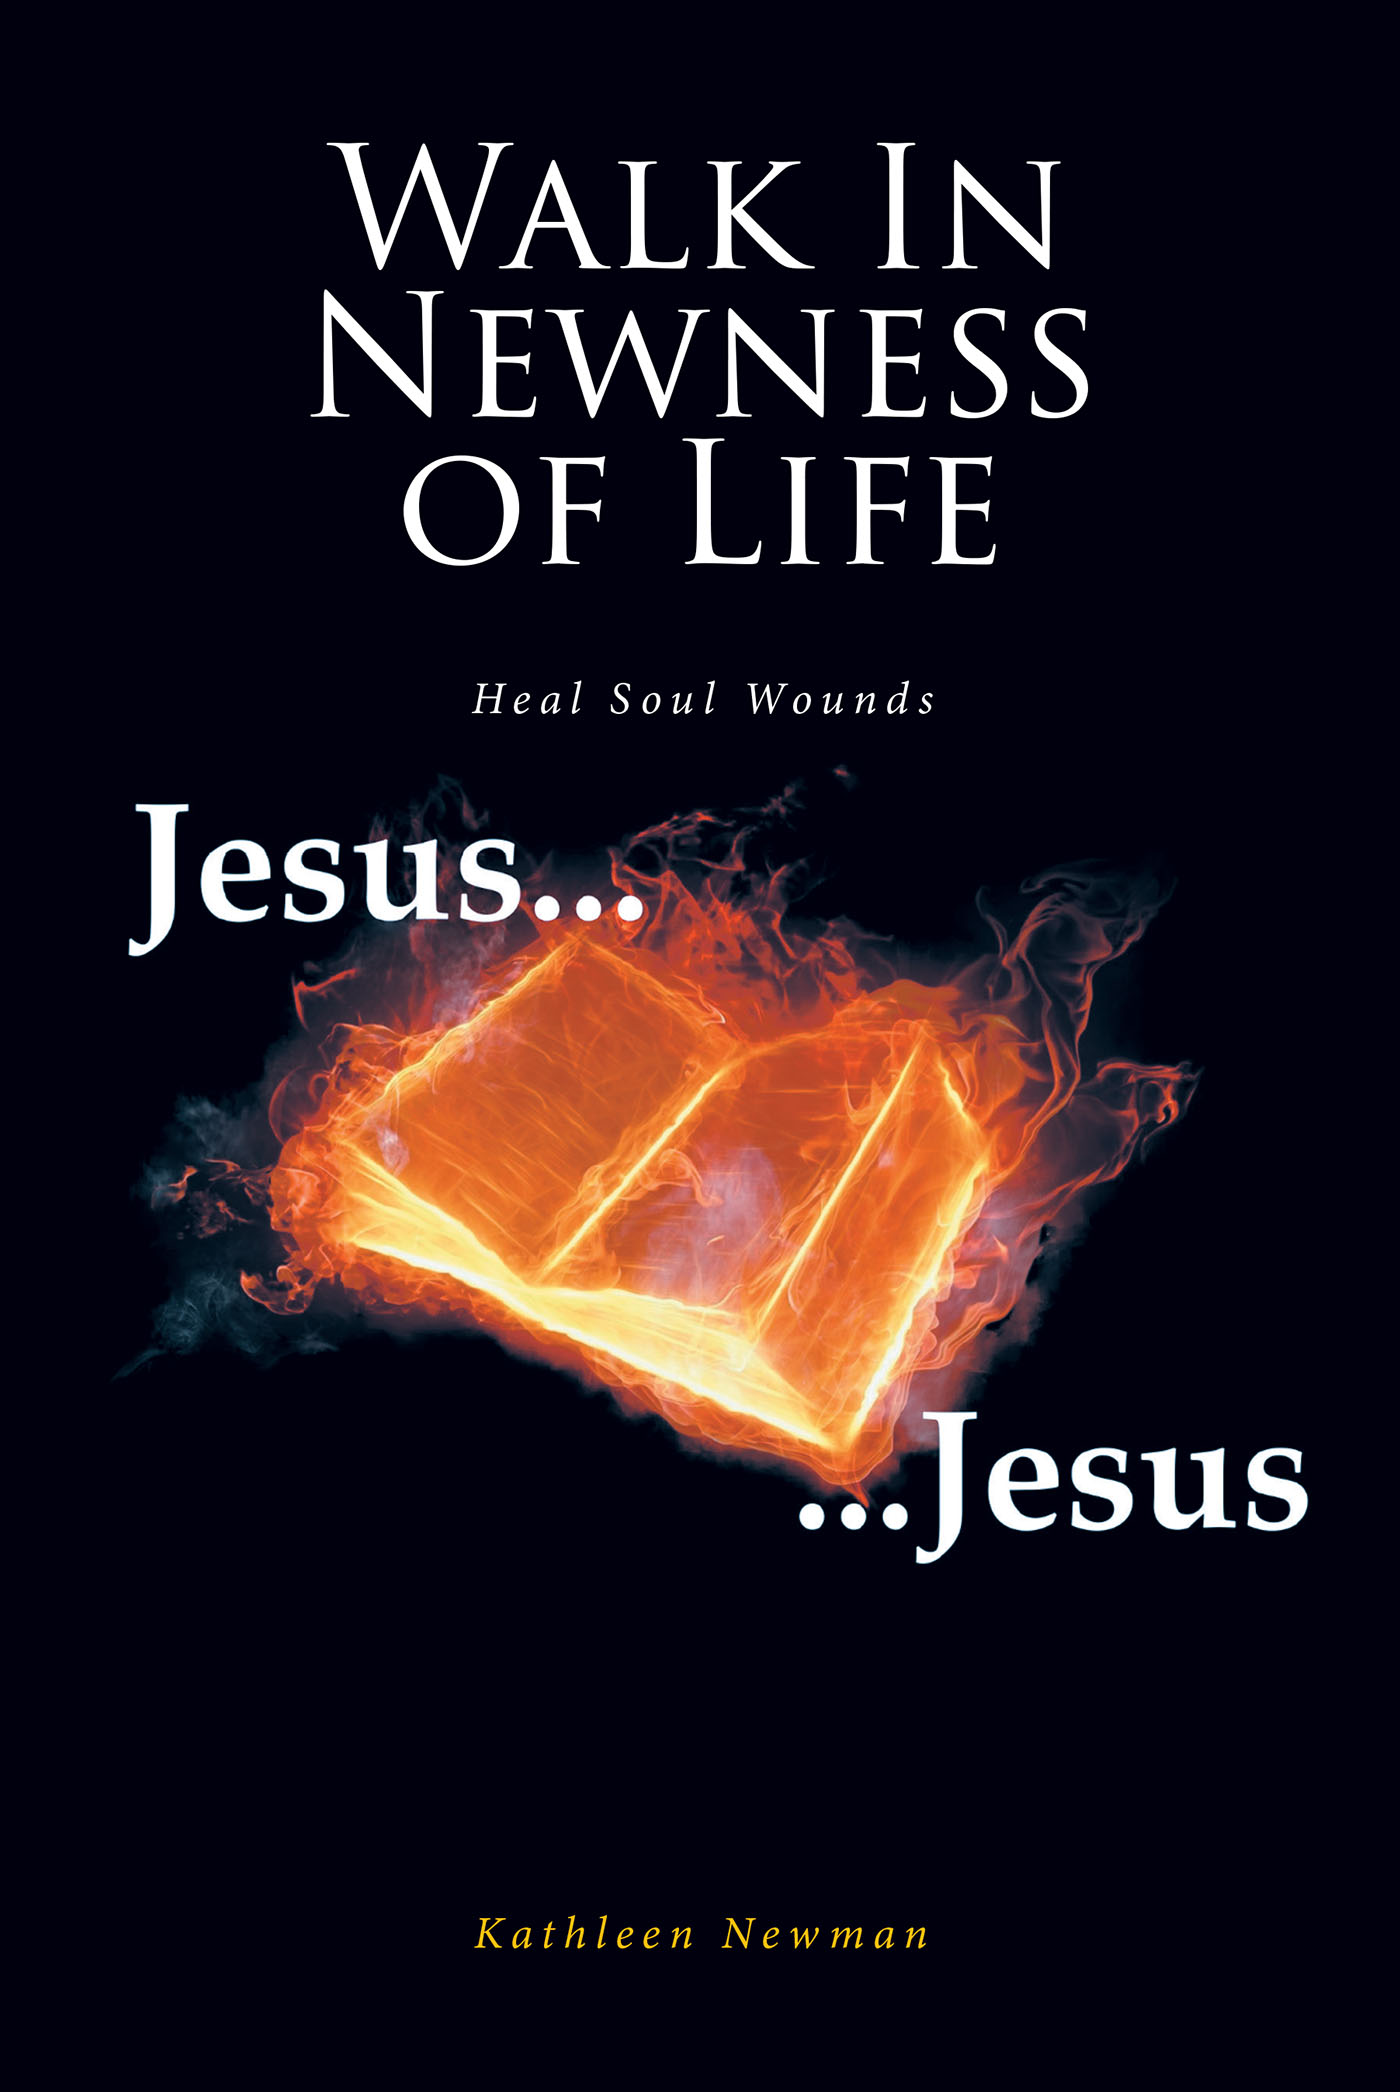 Author Kathleen Frame Newman’s New Book, "Walk in Newness of Life: Heal Soul Wounds," Offers Guidance to Those Seeking to Deepen Their Understanding of Their True Selves